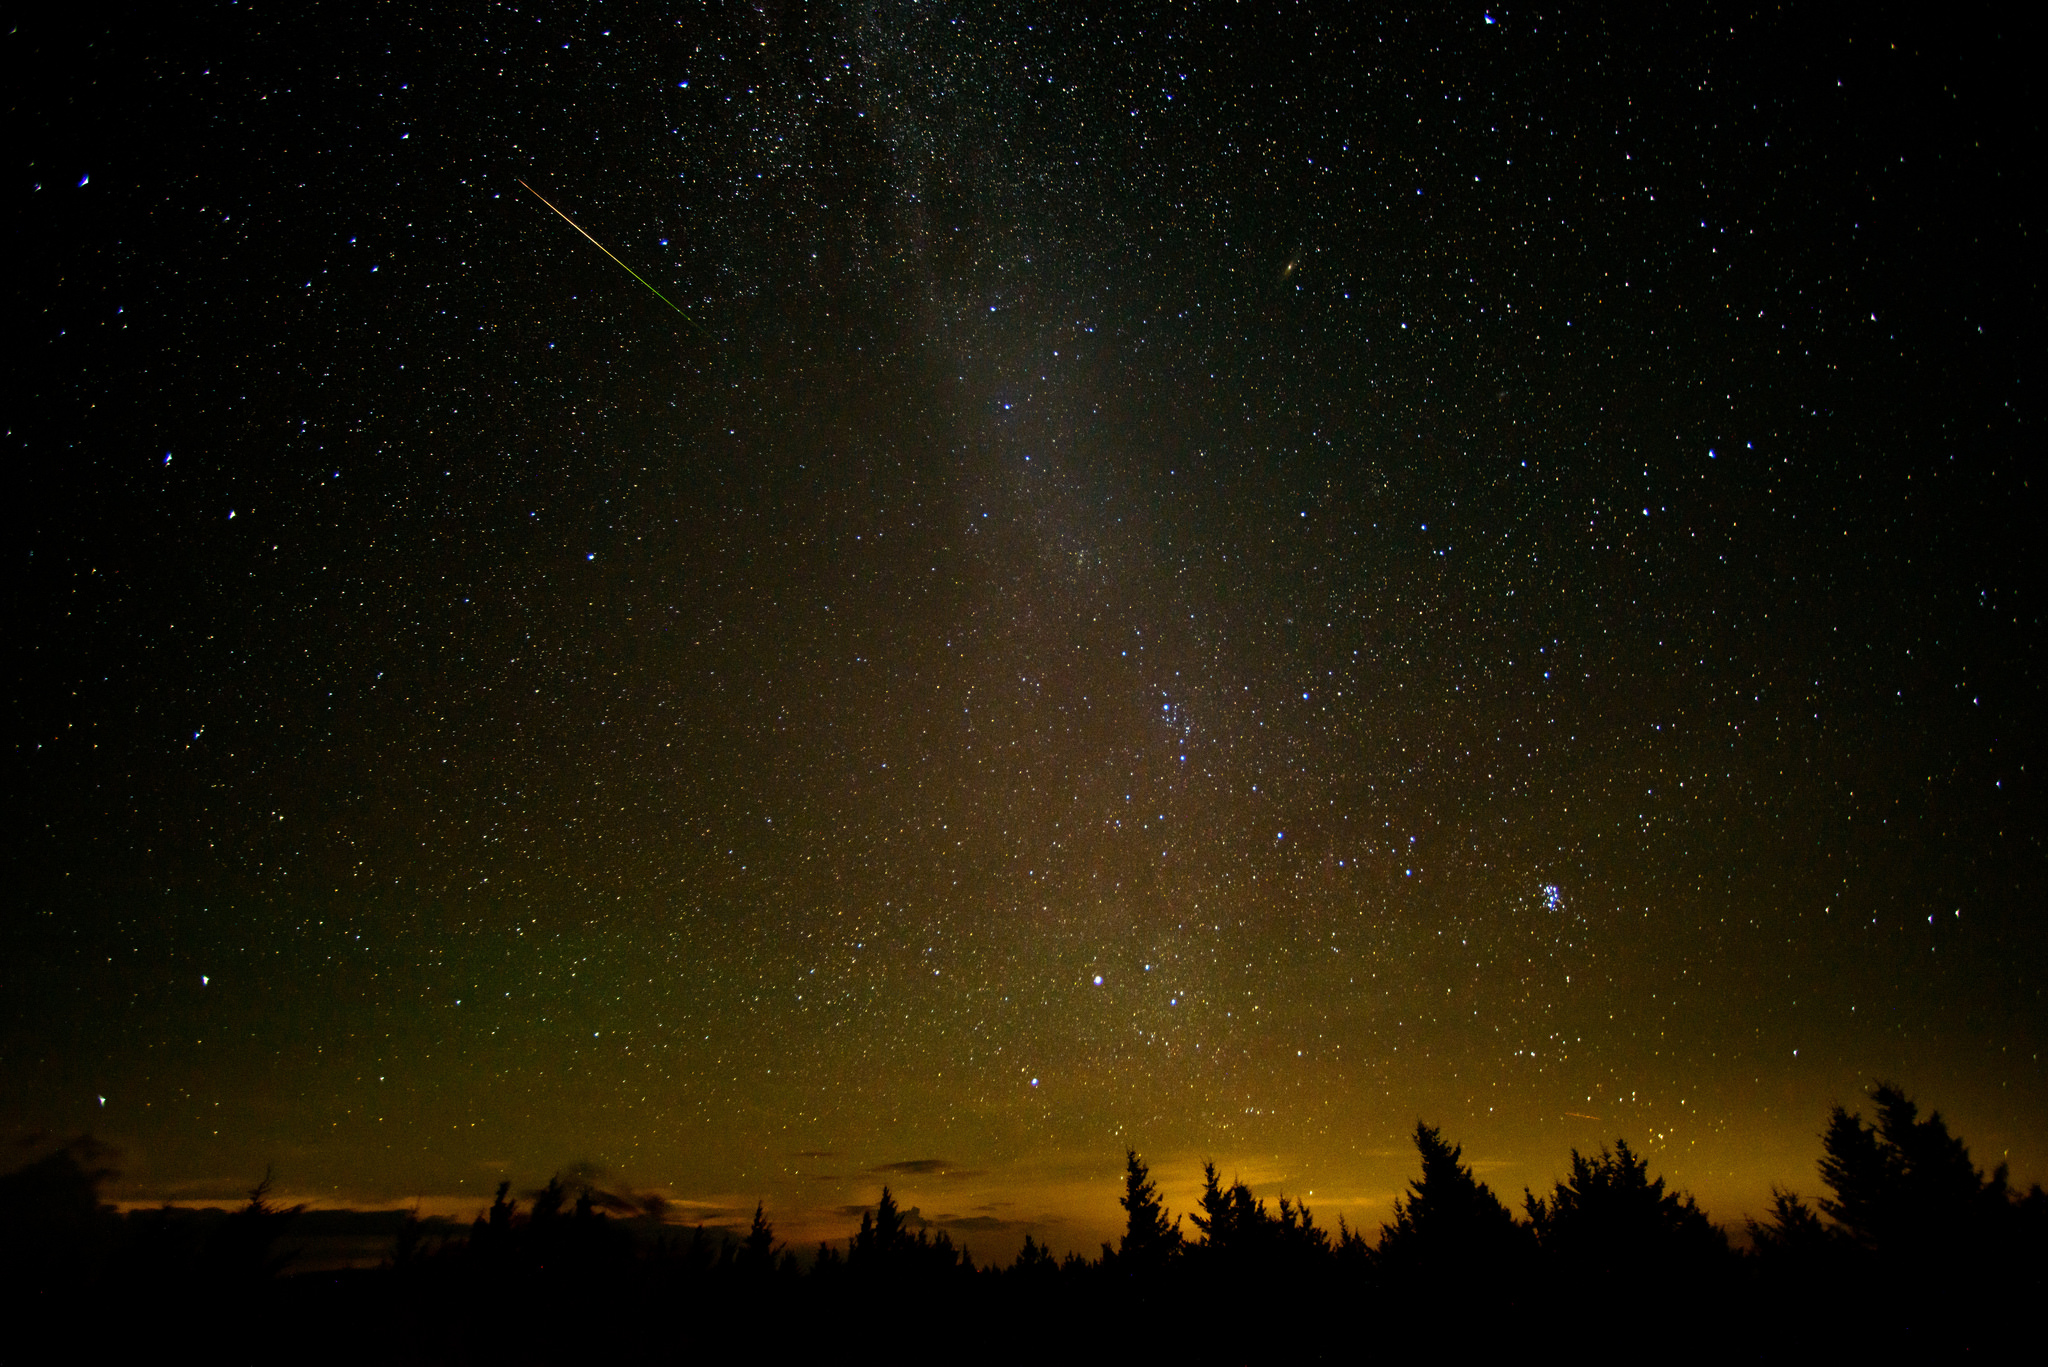 Meteor in the sky at twilight.